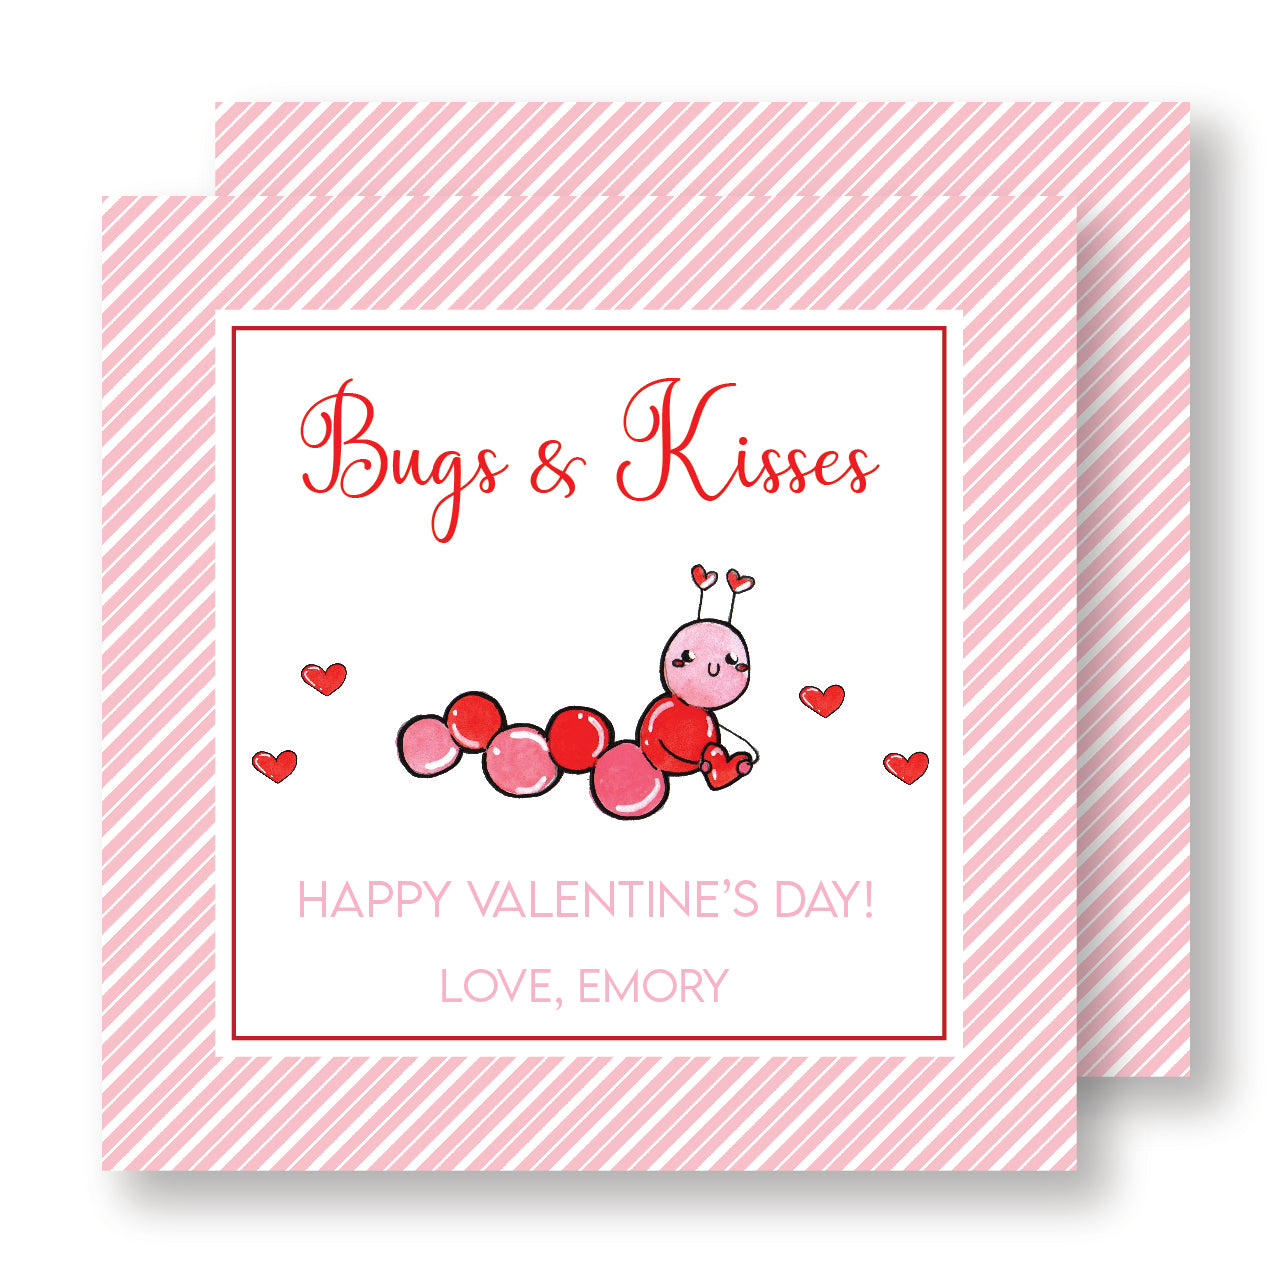 Bugs and Kisses Valentine